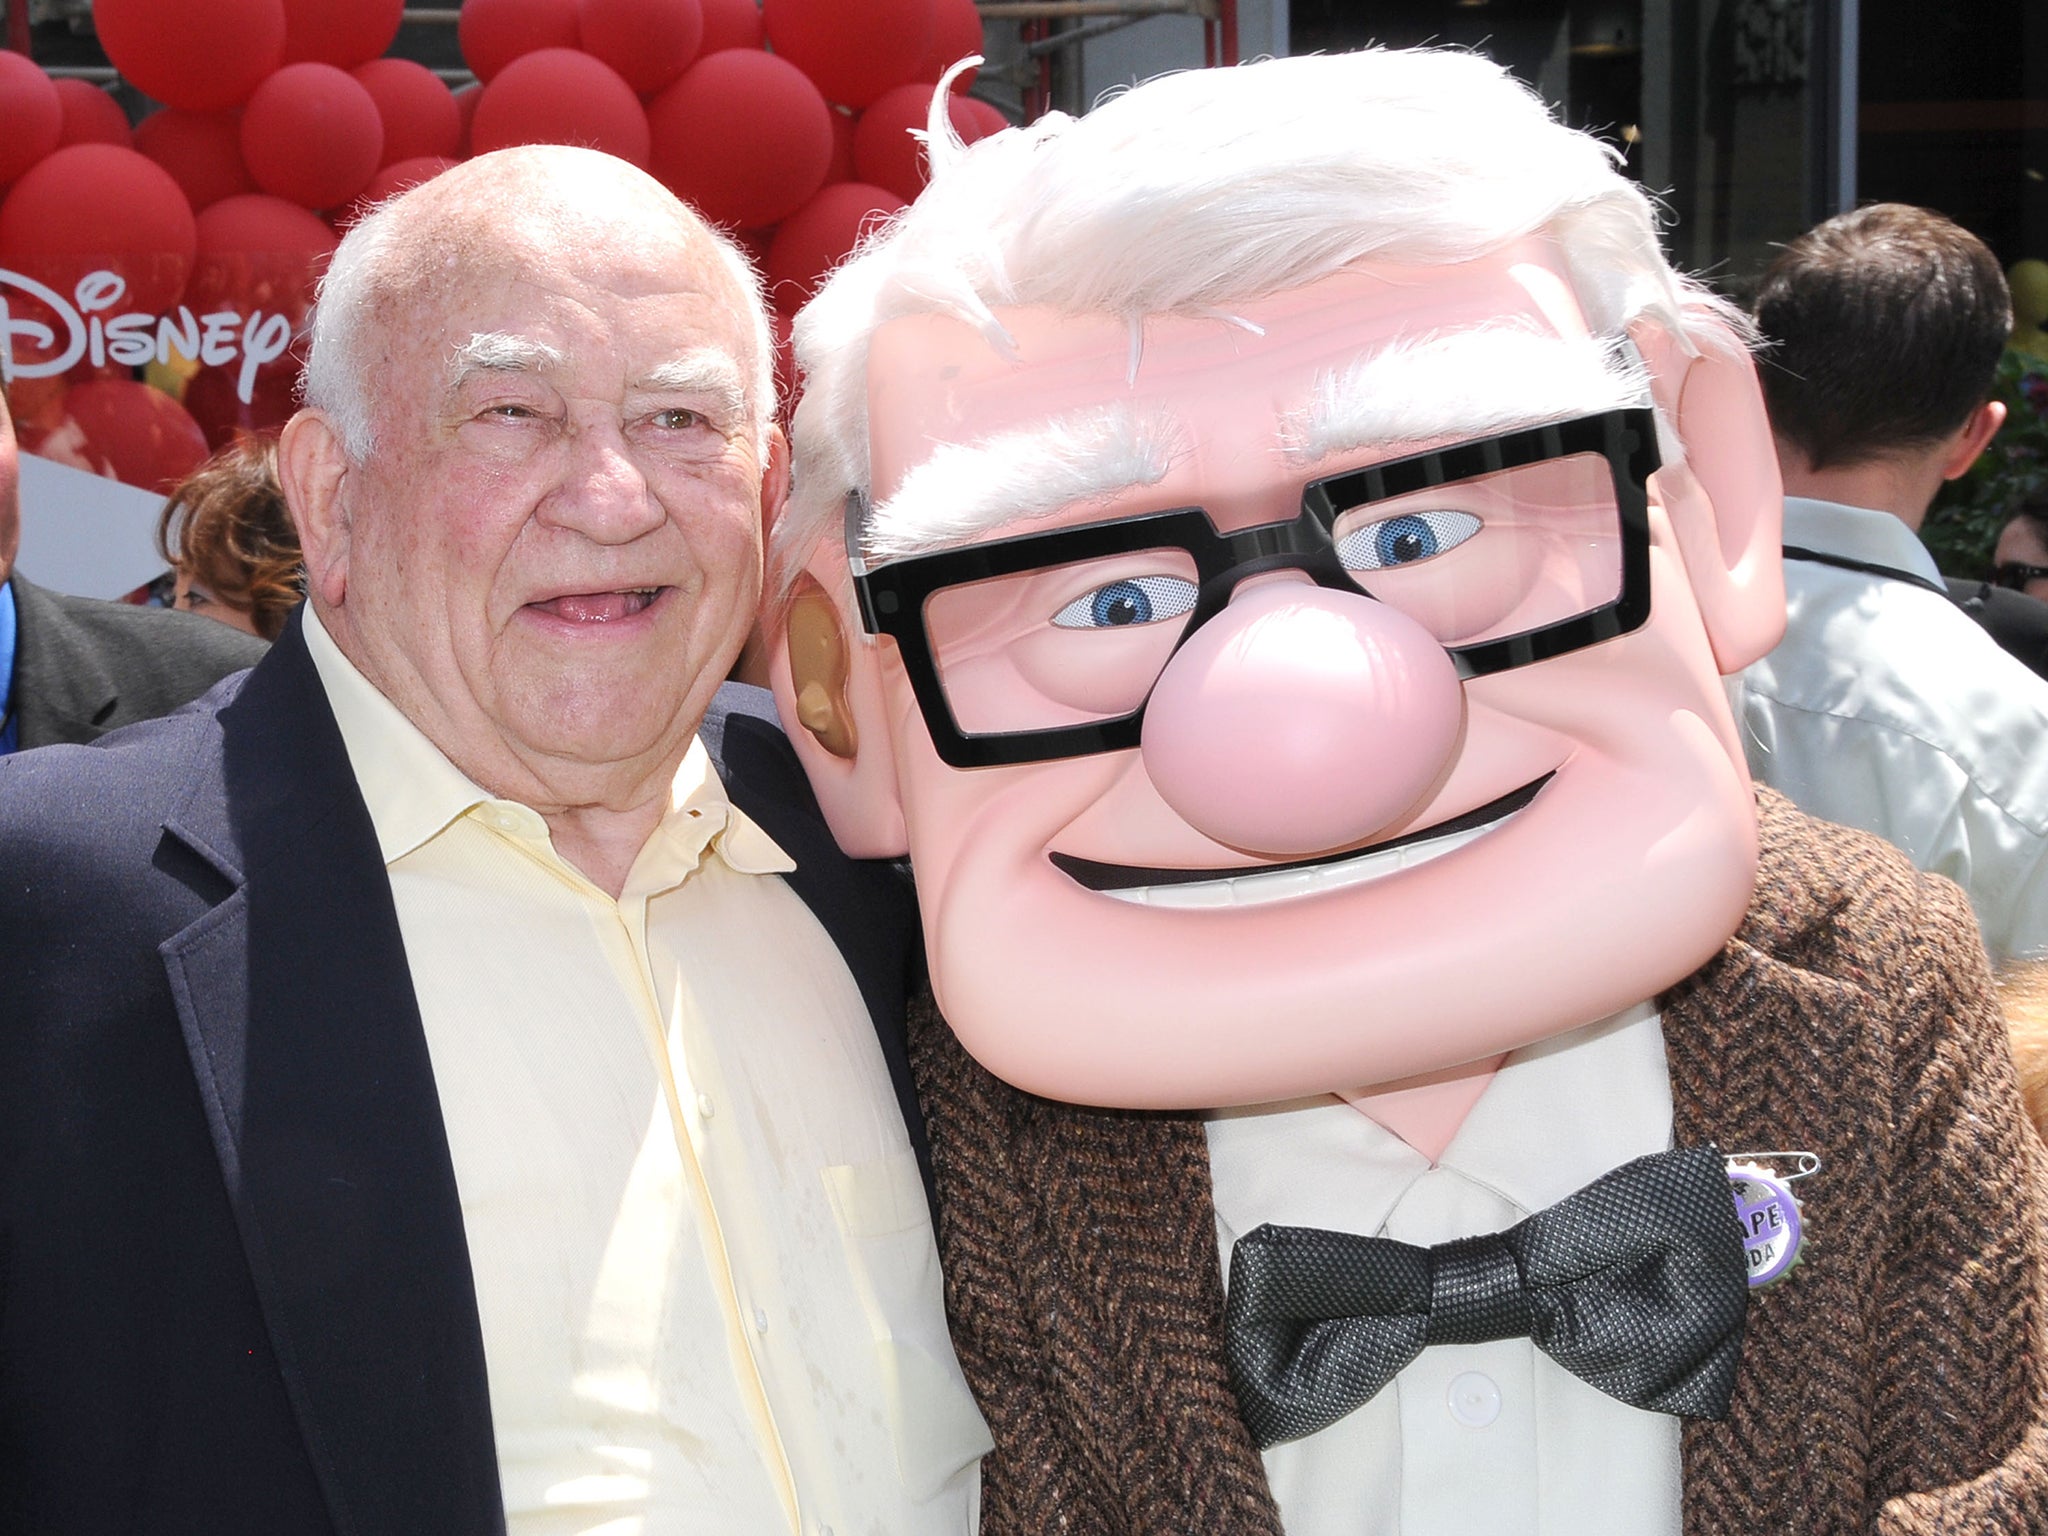 At the premiere of ‘Up’ in 2009